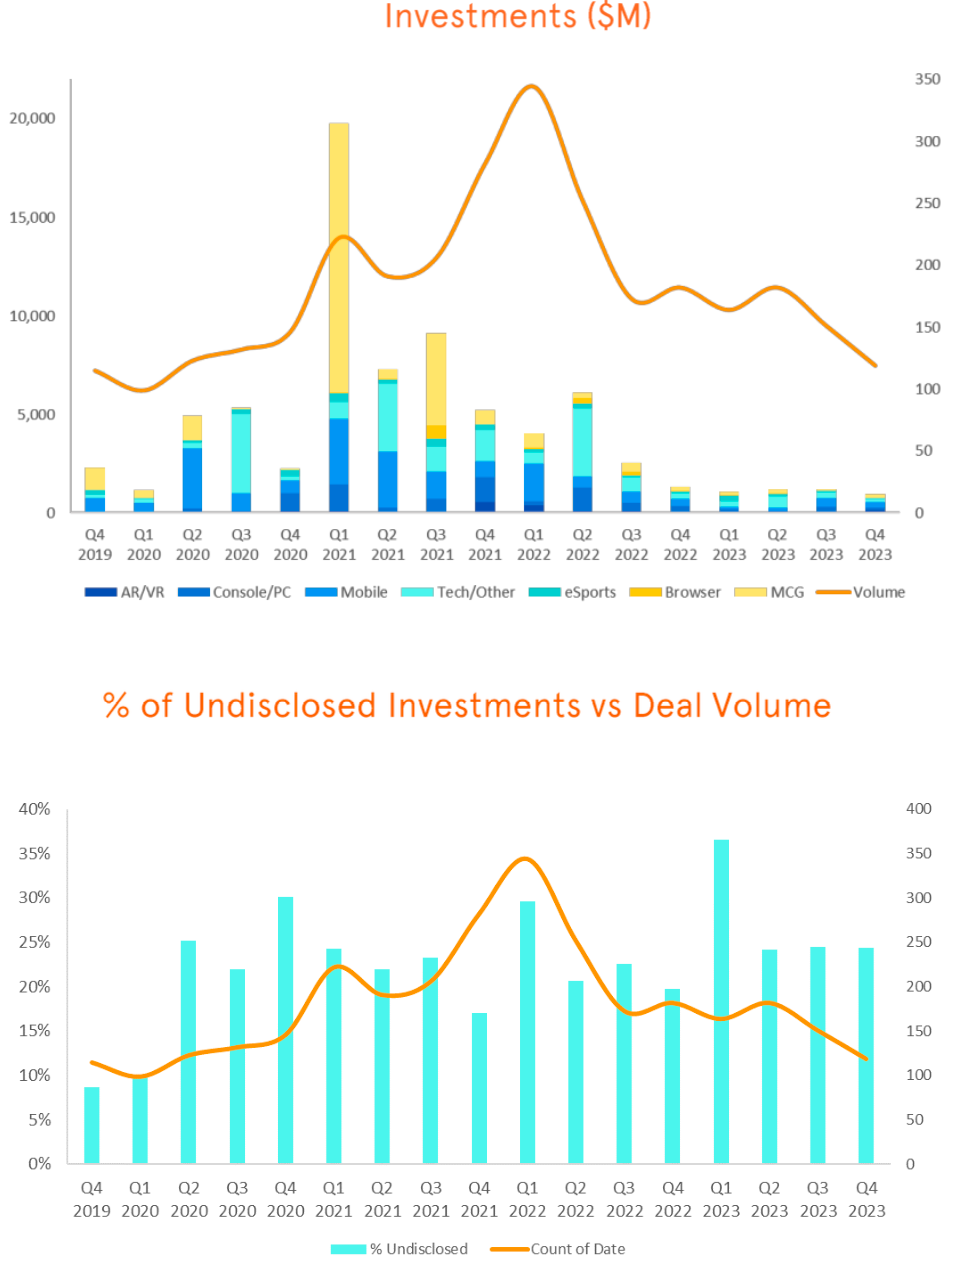 Q4 2023 Results - Private Investments